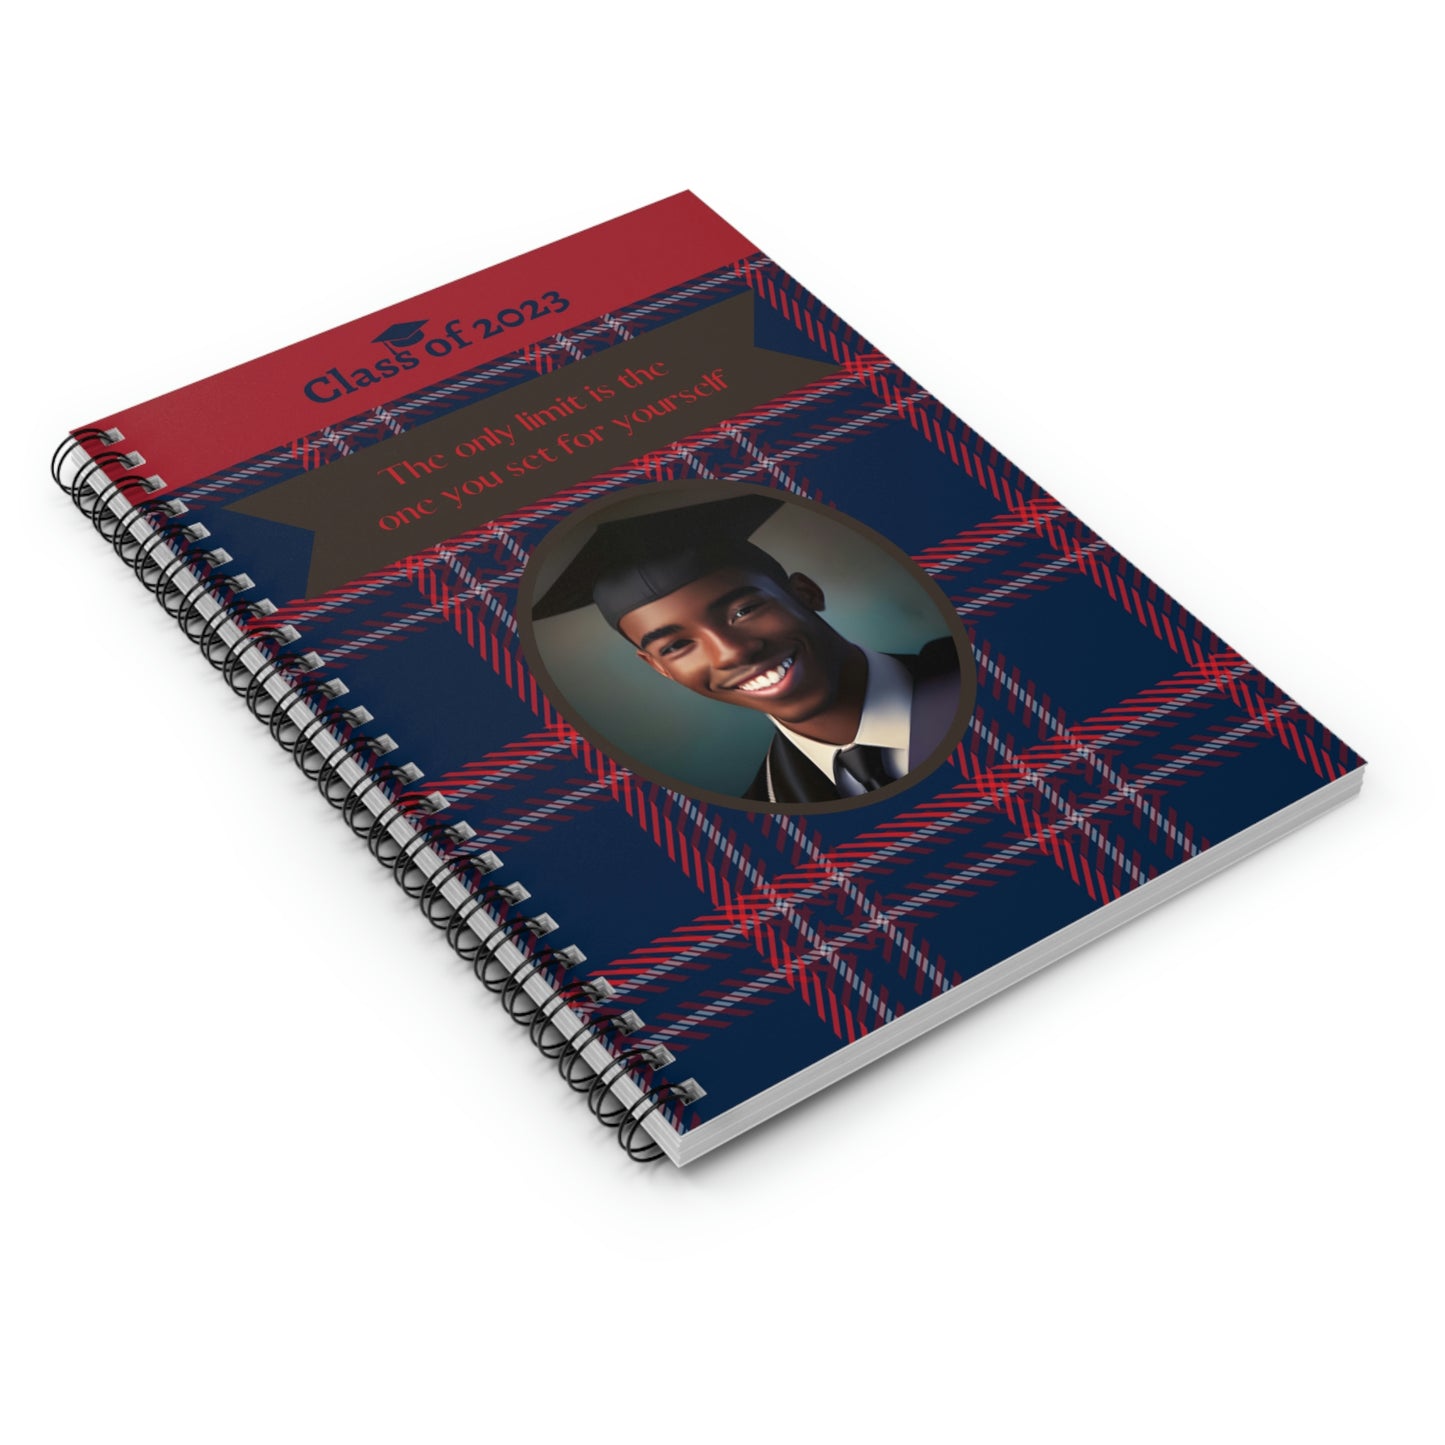 Class of 2023 Graduate Journal - (AA Young Man 2) - Ruled Line